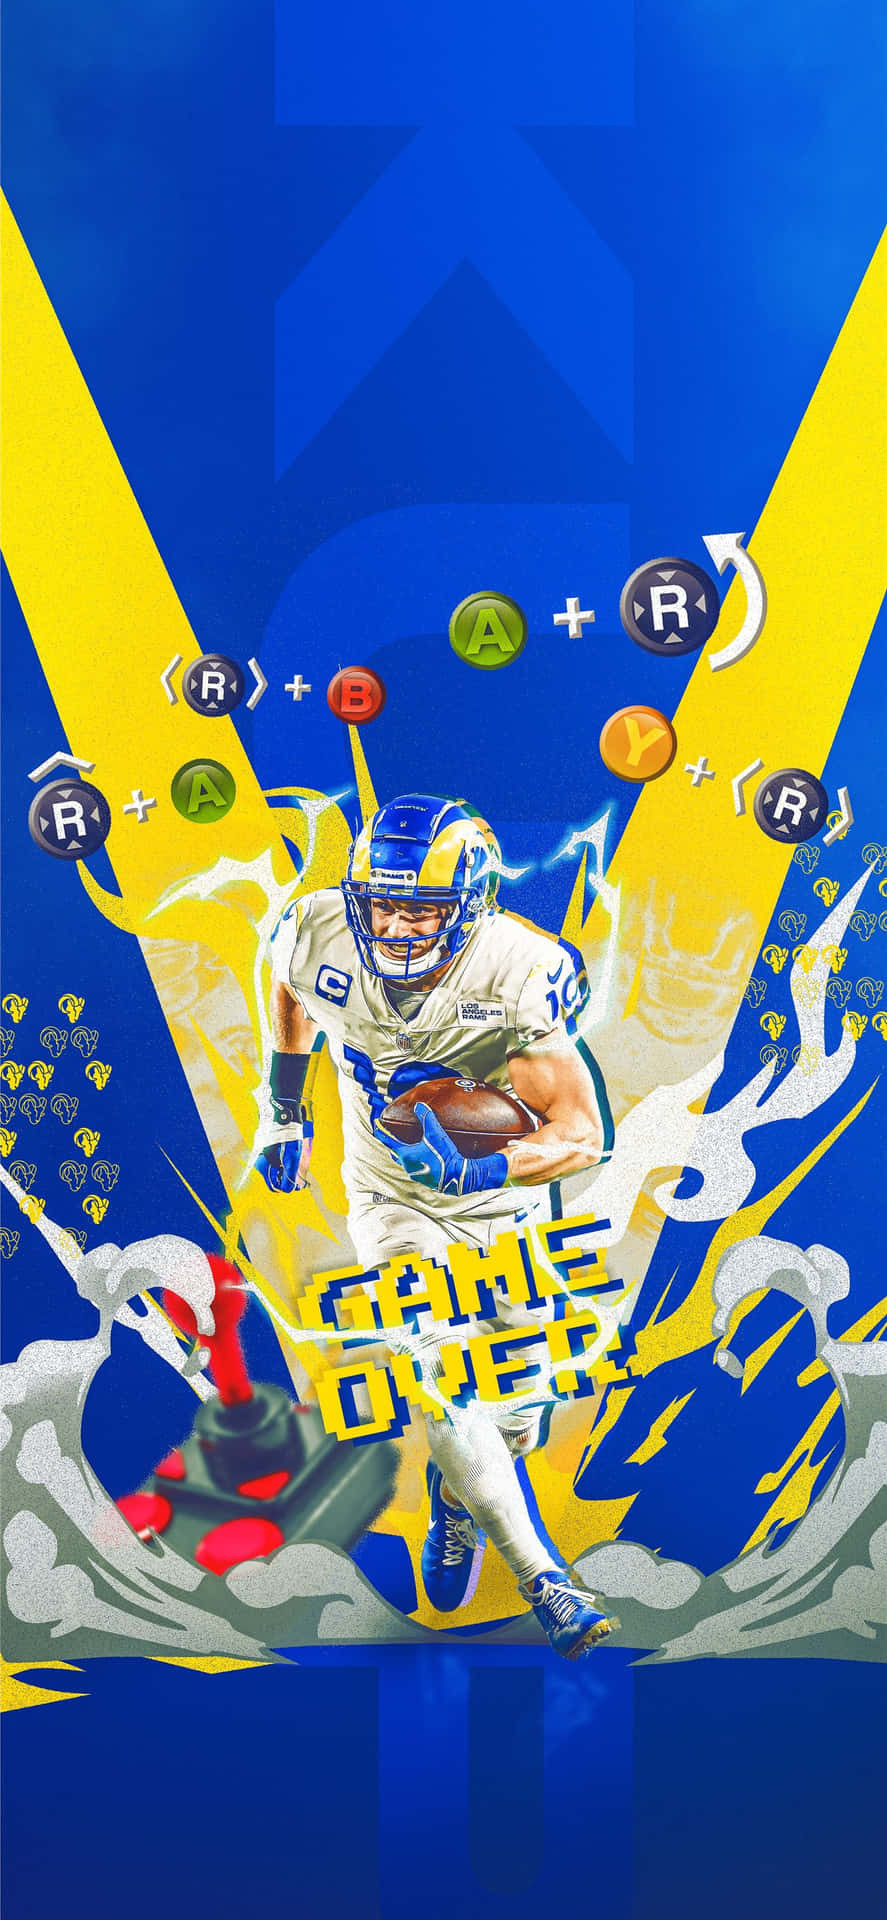 Get the New Rams Iphone Wallpaper